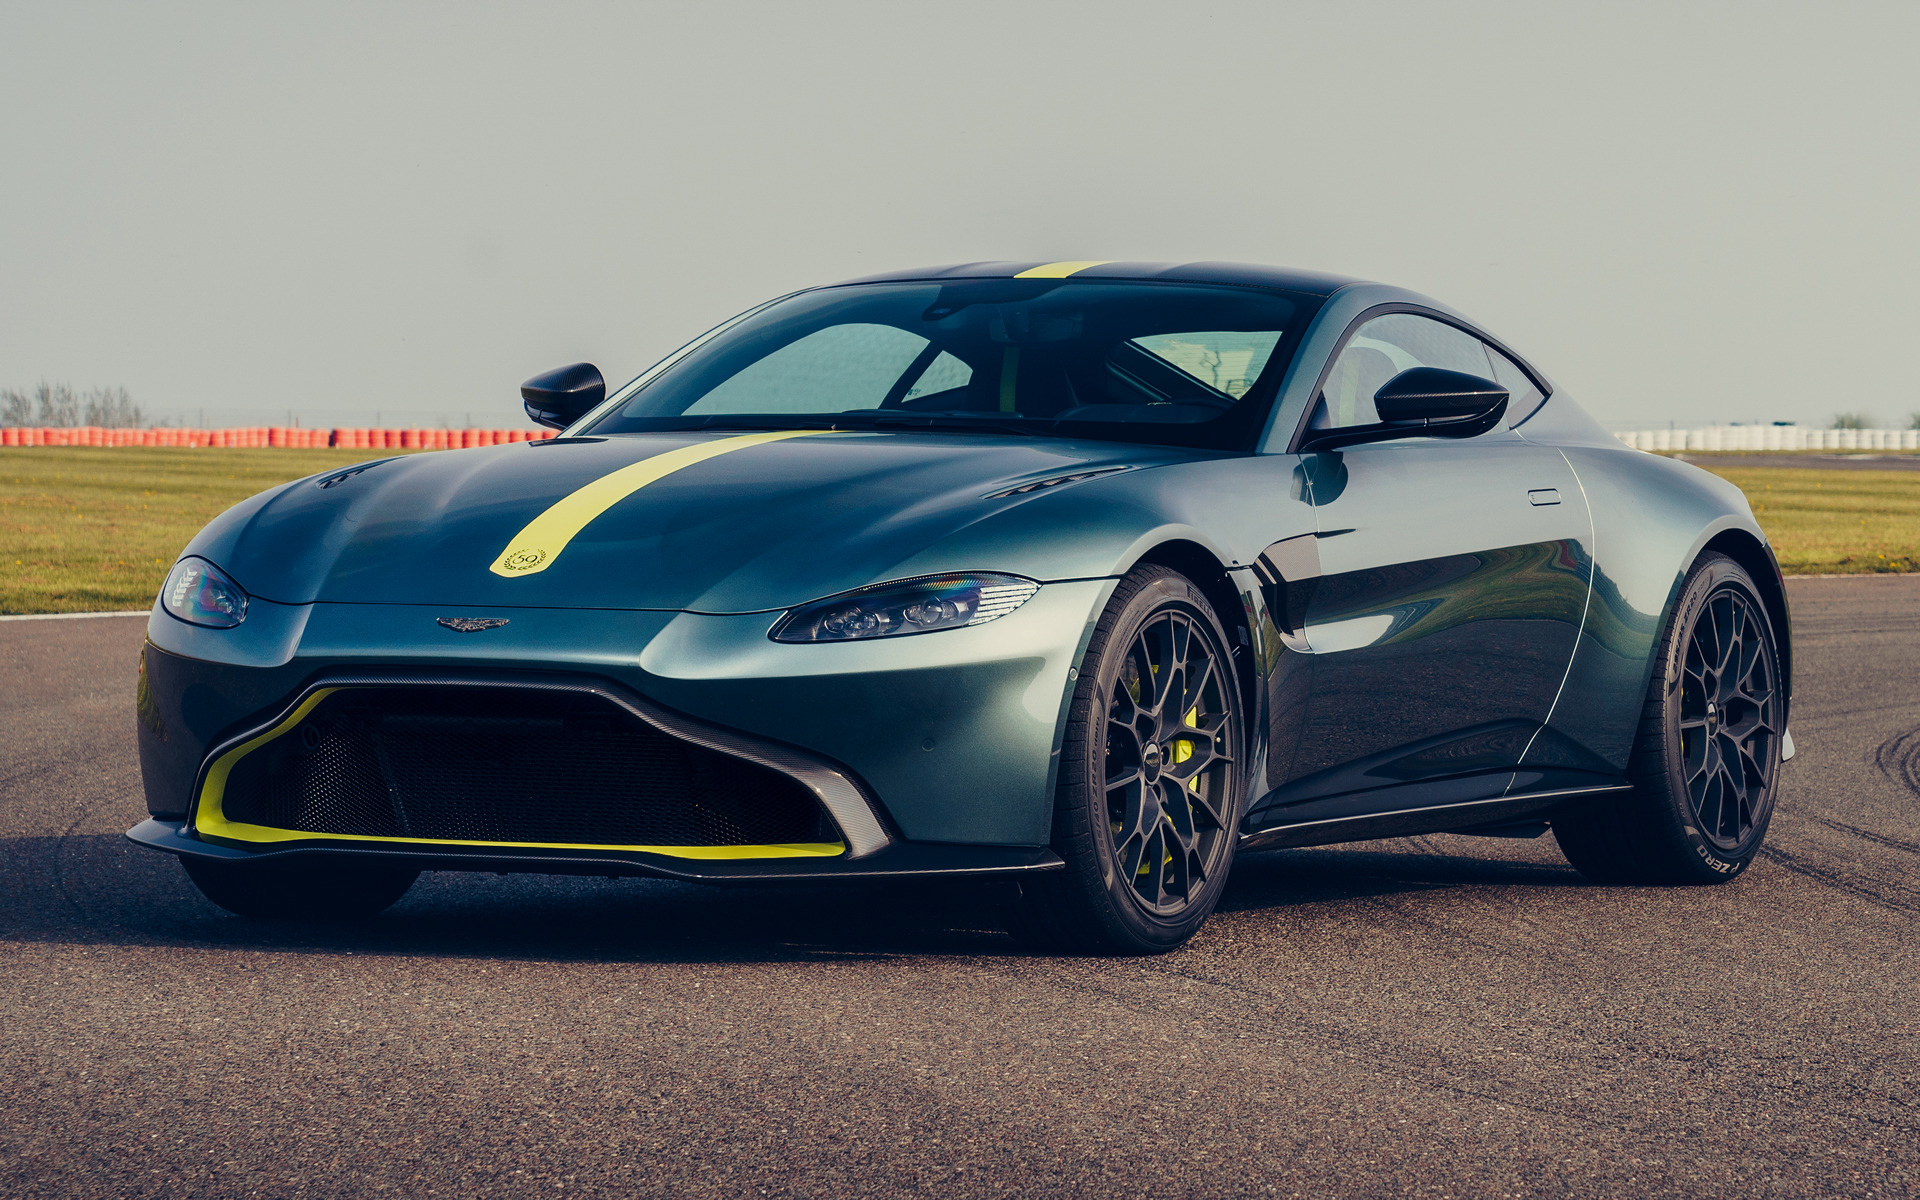 2019 Aston Martin Vantage Amr 59 Wallpapers And Hd Images Car Pixel